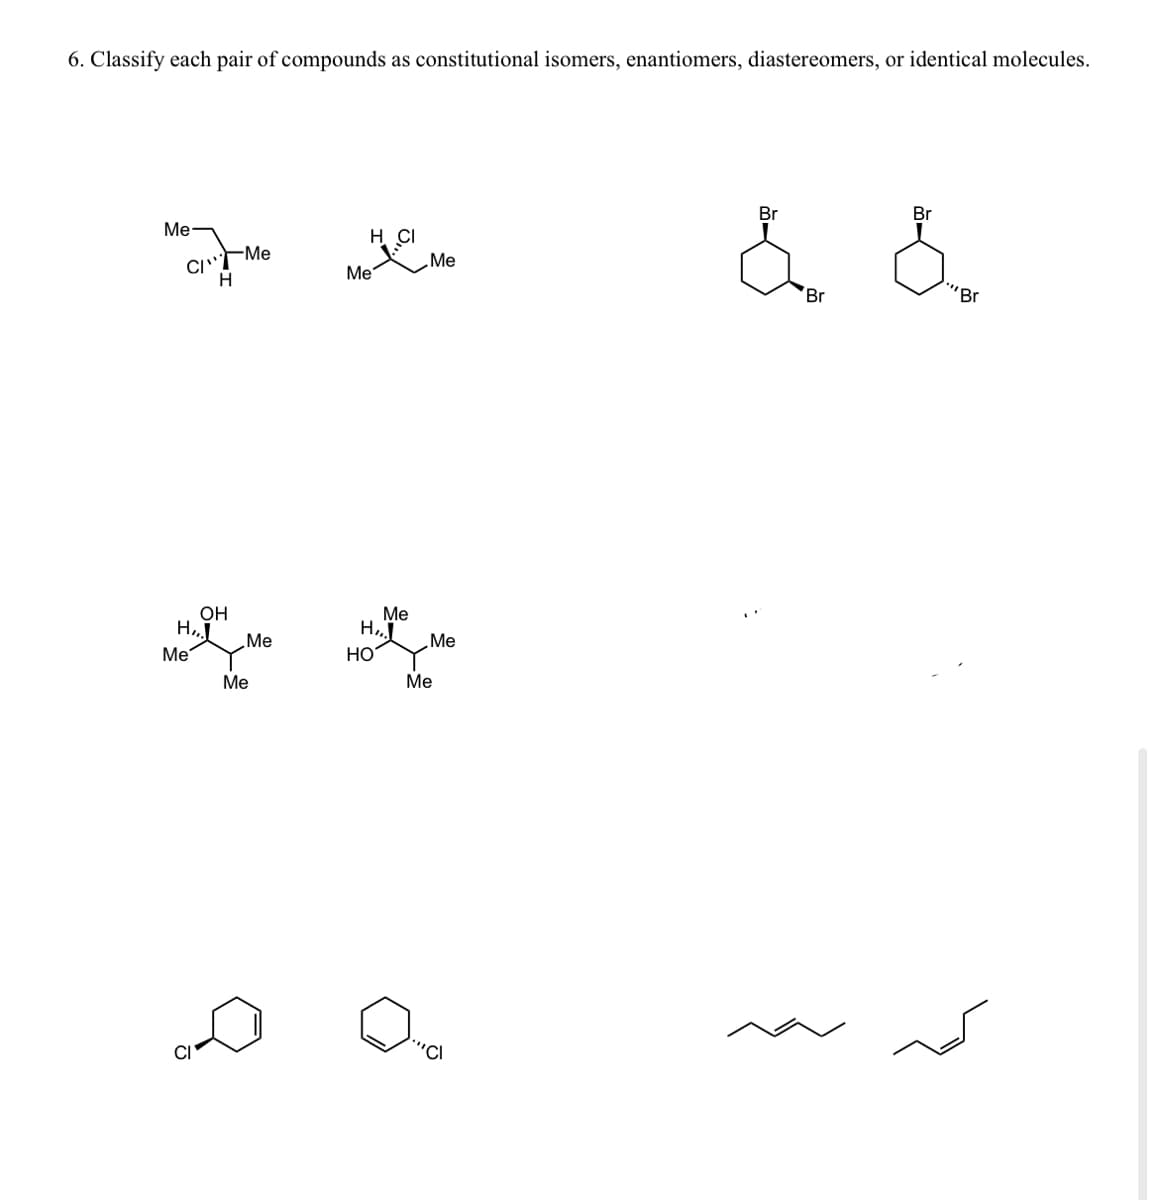 6. Classify each pair of compounds as constitutional isomers, enantiomers, diastereomers, or identical molecules.
Me
C Me
H
OH
H₂
e
Me
Me
Me
H CI
наме
Me
Me
Me
H₂,
НО
Me
Me
""Cl
Br
Br
Br
""Br